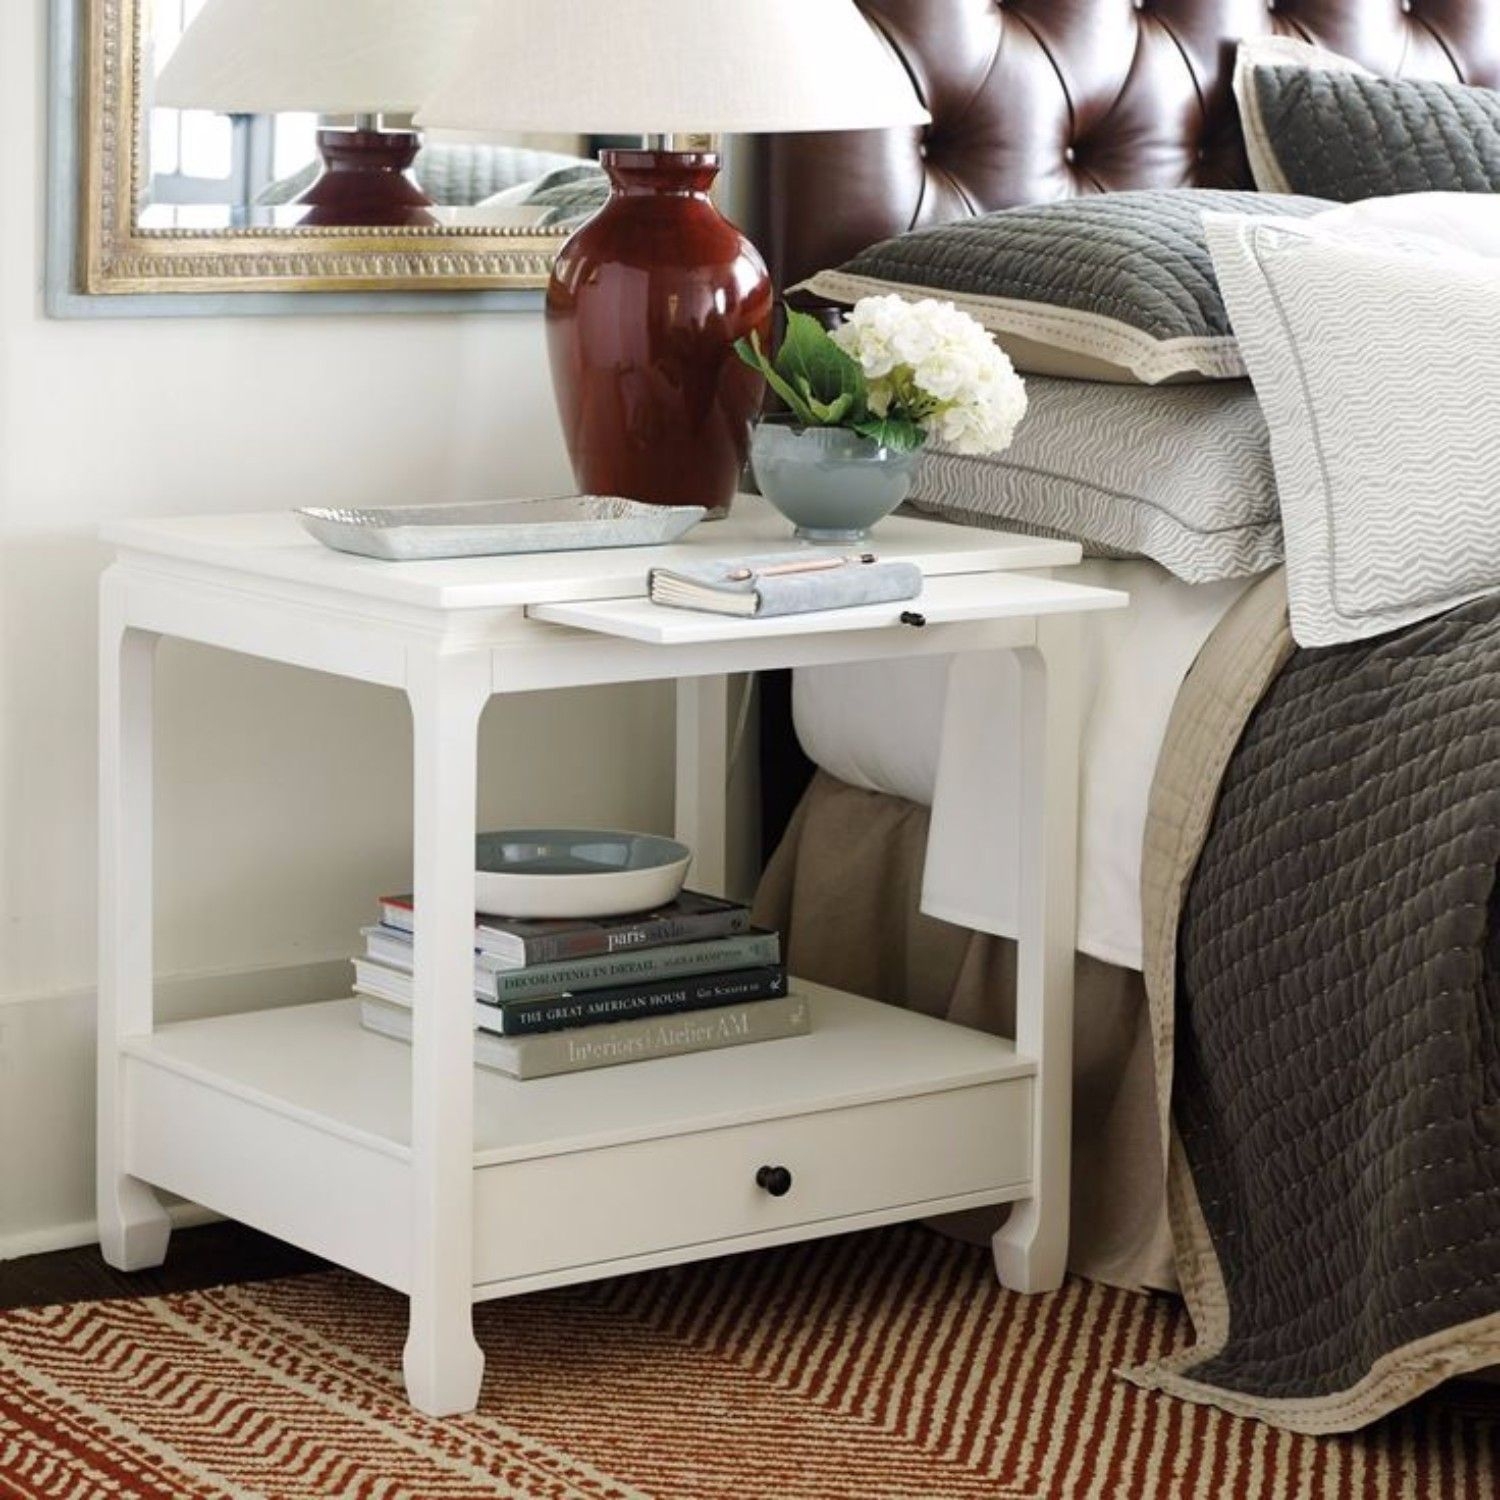 Sophie side table dimensions overall 29 1 4 h x